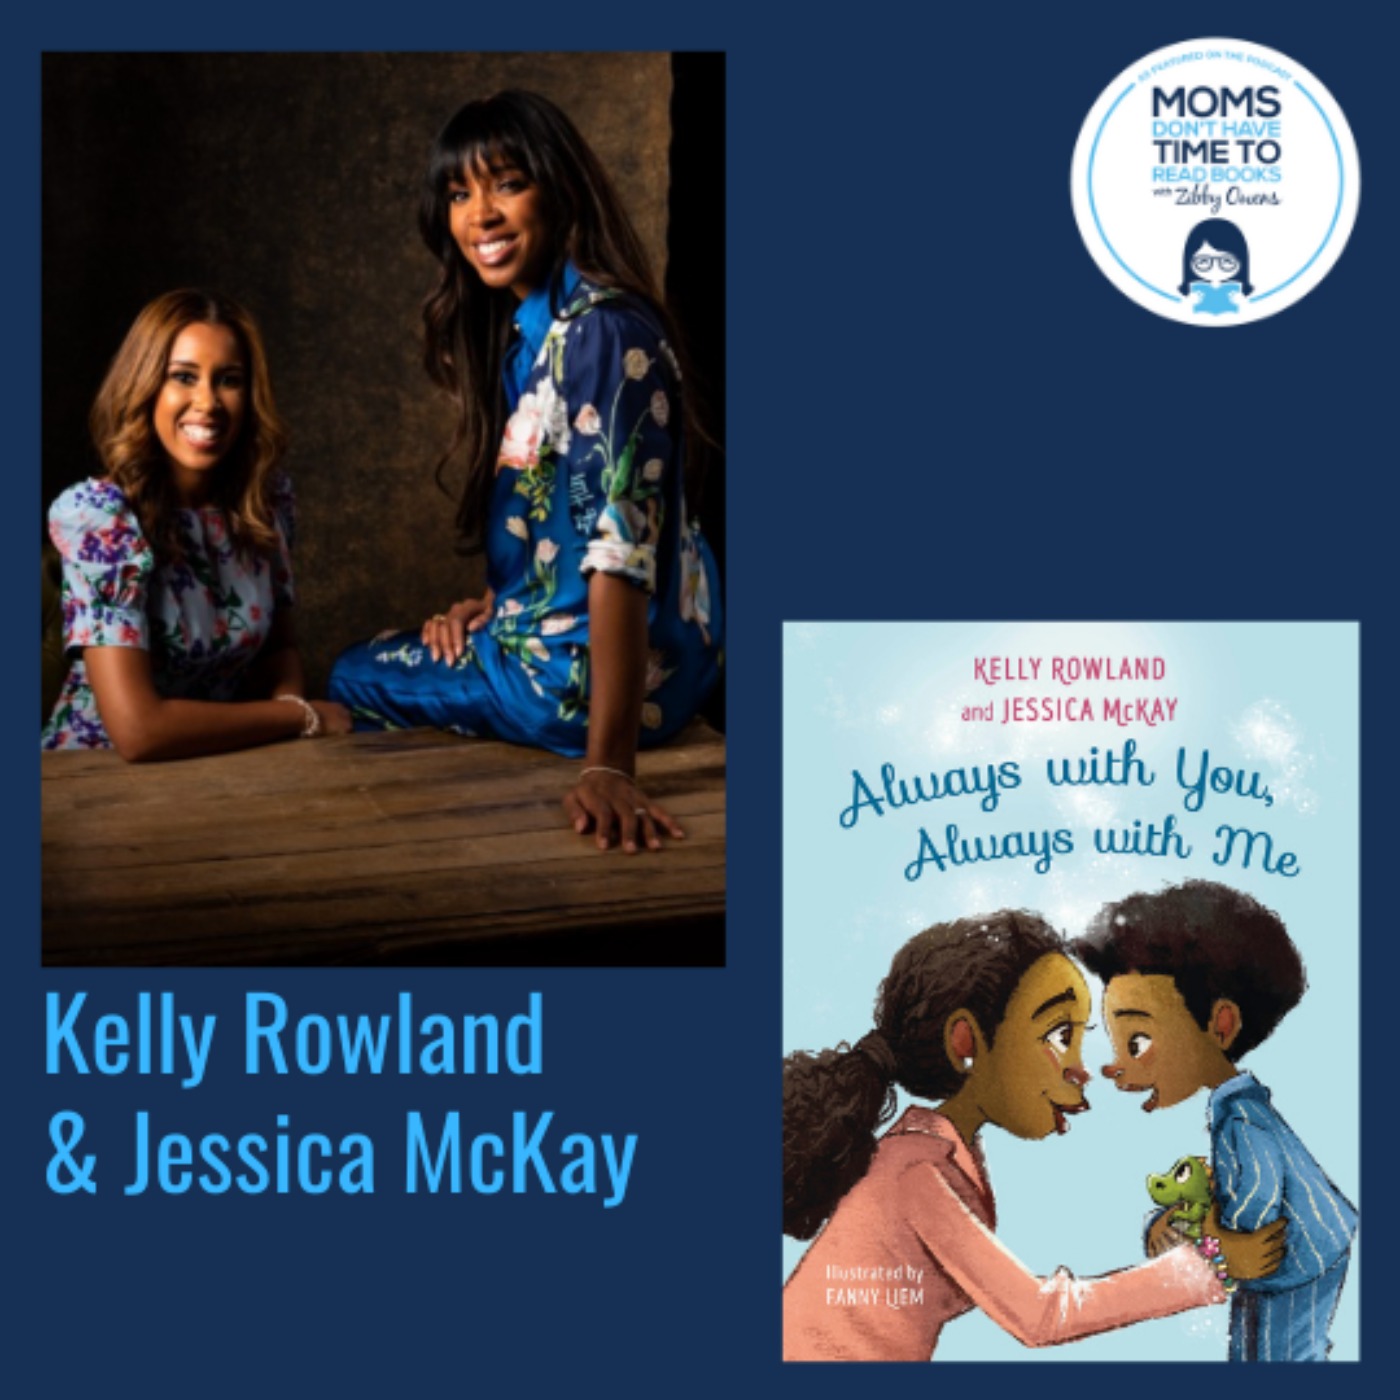 Kelly Rowland and Jessica McKay, ALWAYS WITH YOU, ALWAYS WITH ME